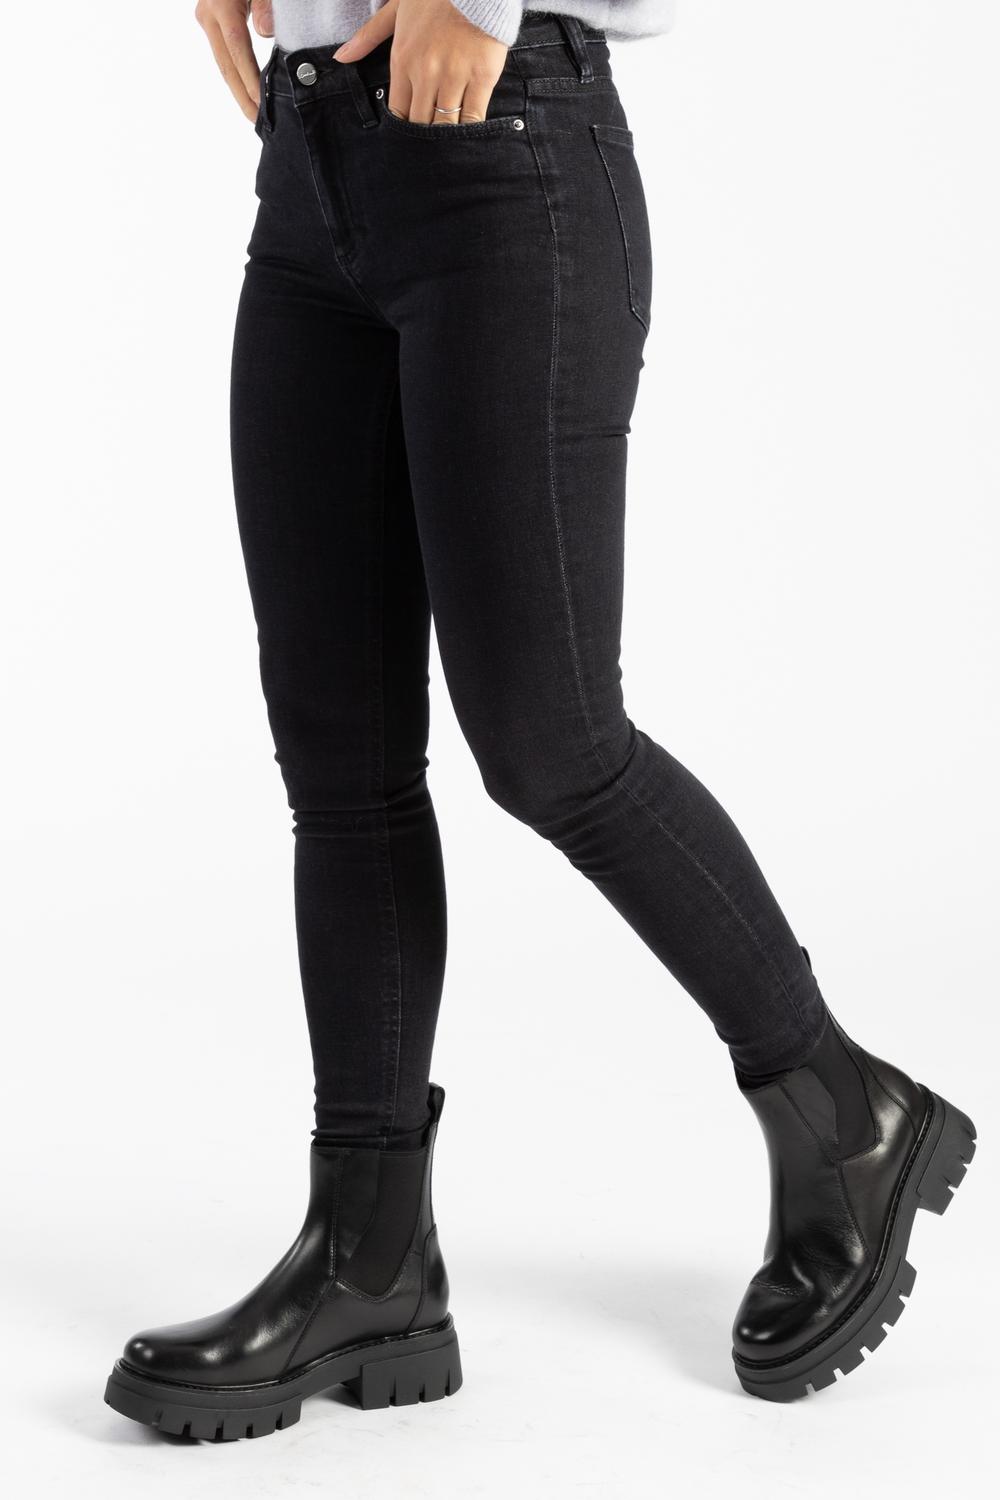 Don The Fuller - Jeans Skinny Nero Donna - CANNES 912